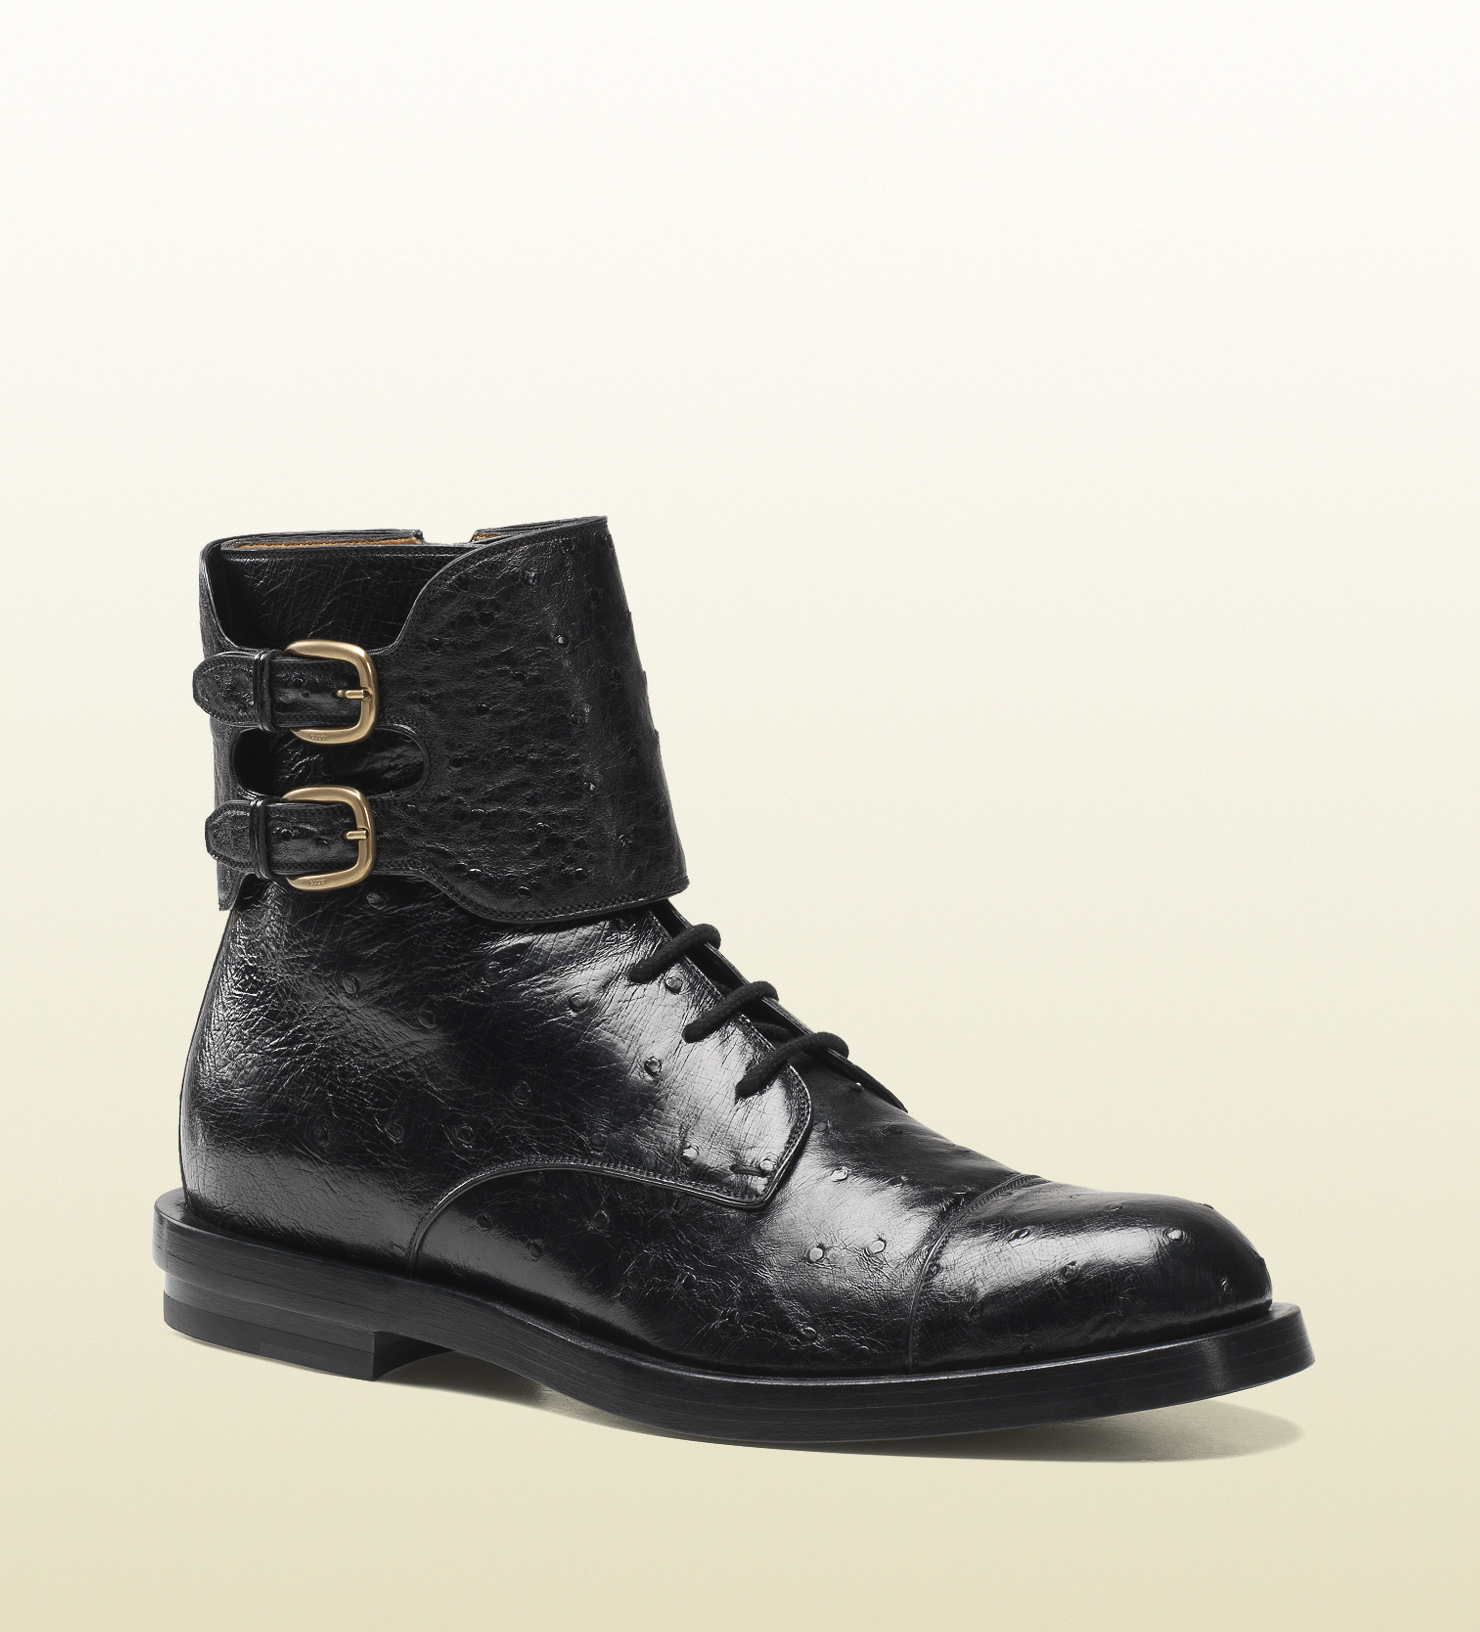 Gucci Black Ostrich Double Buckle Military Boot for Men - Lyst